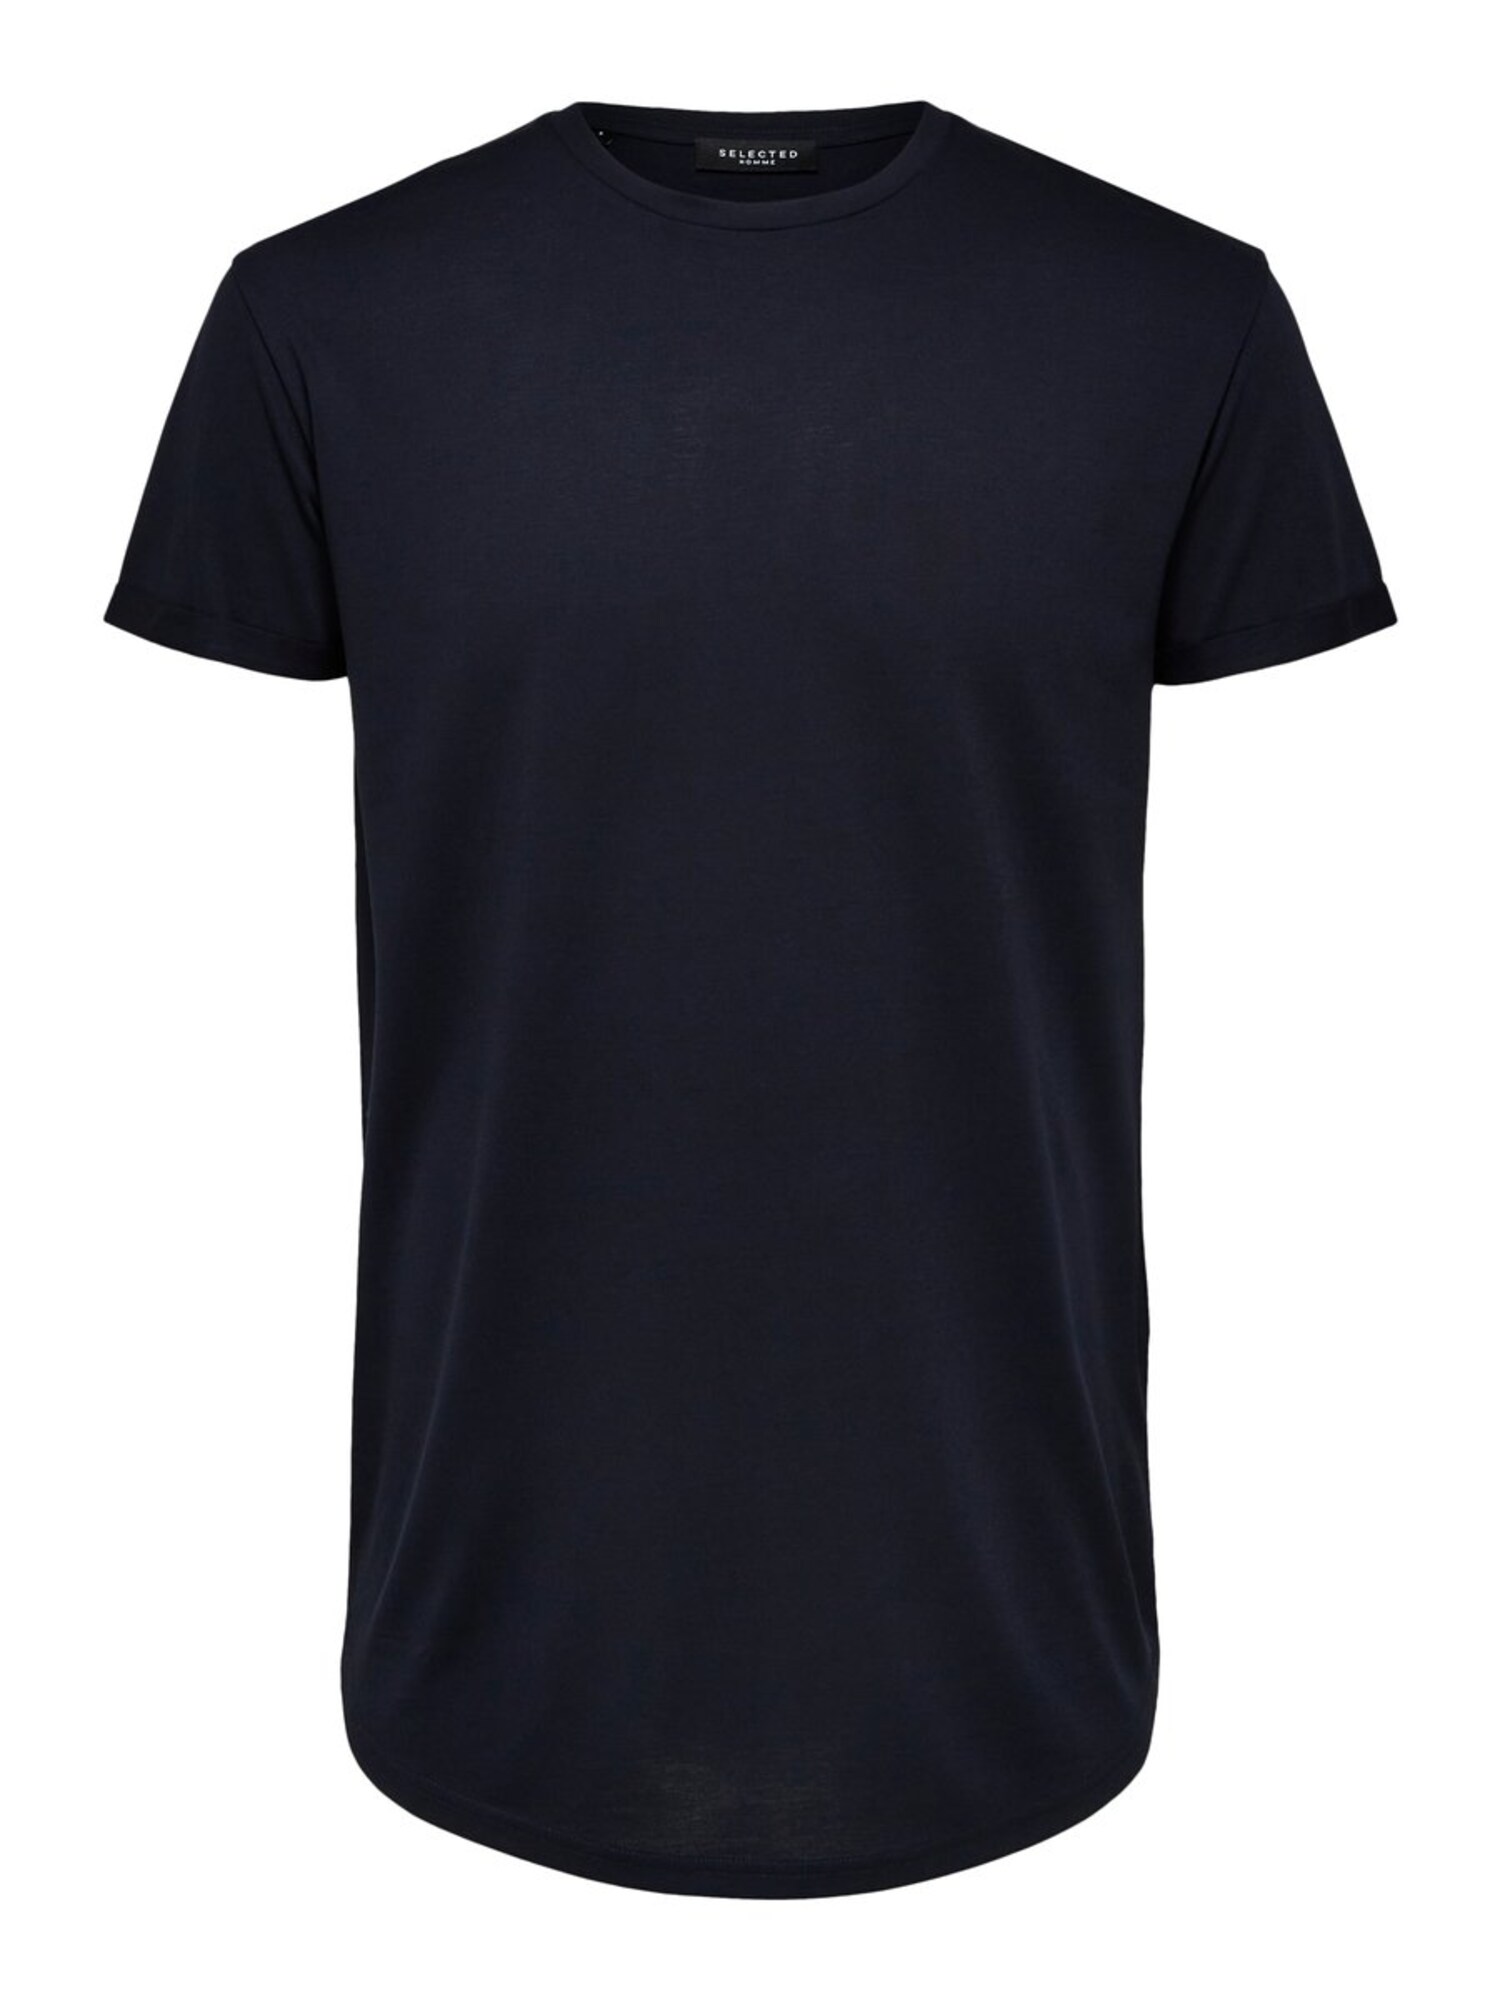 SELECTED HOMME Abgerundetes Maxi T-Shirt navy